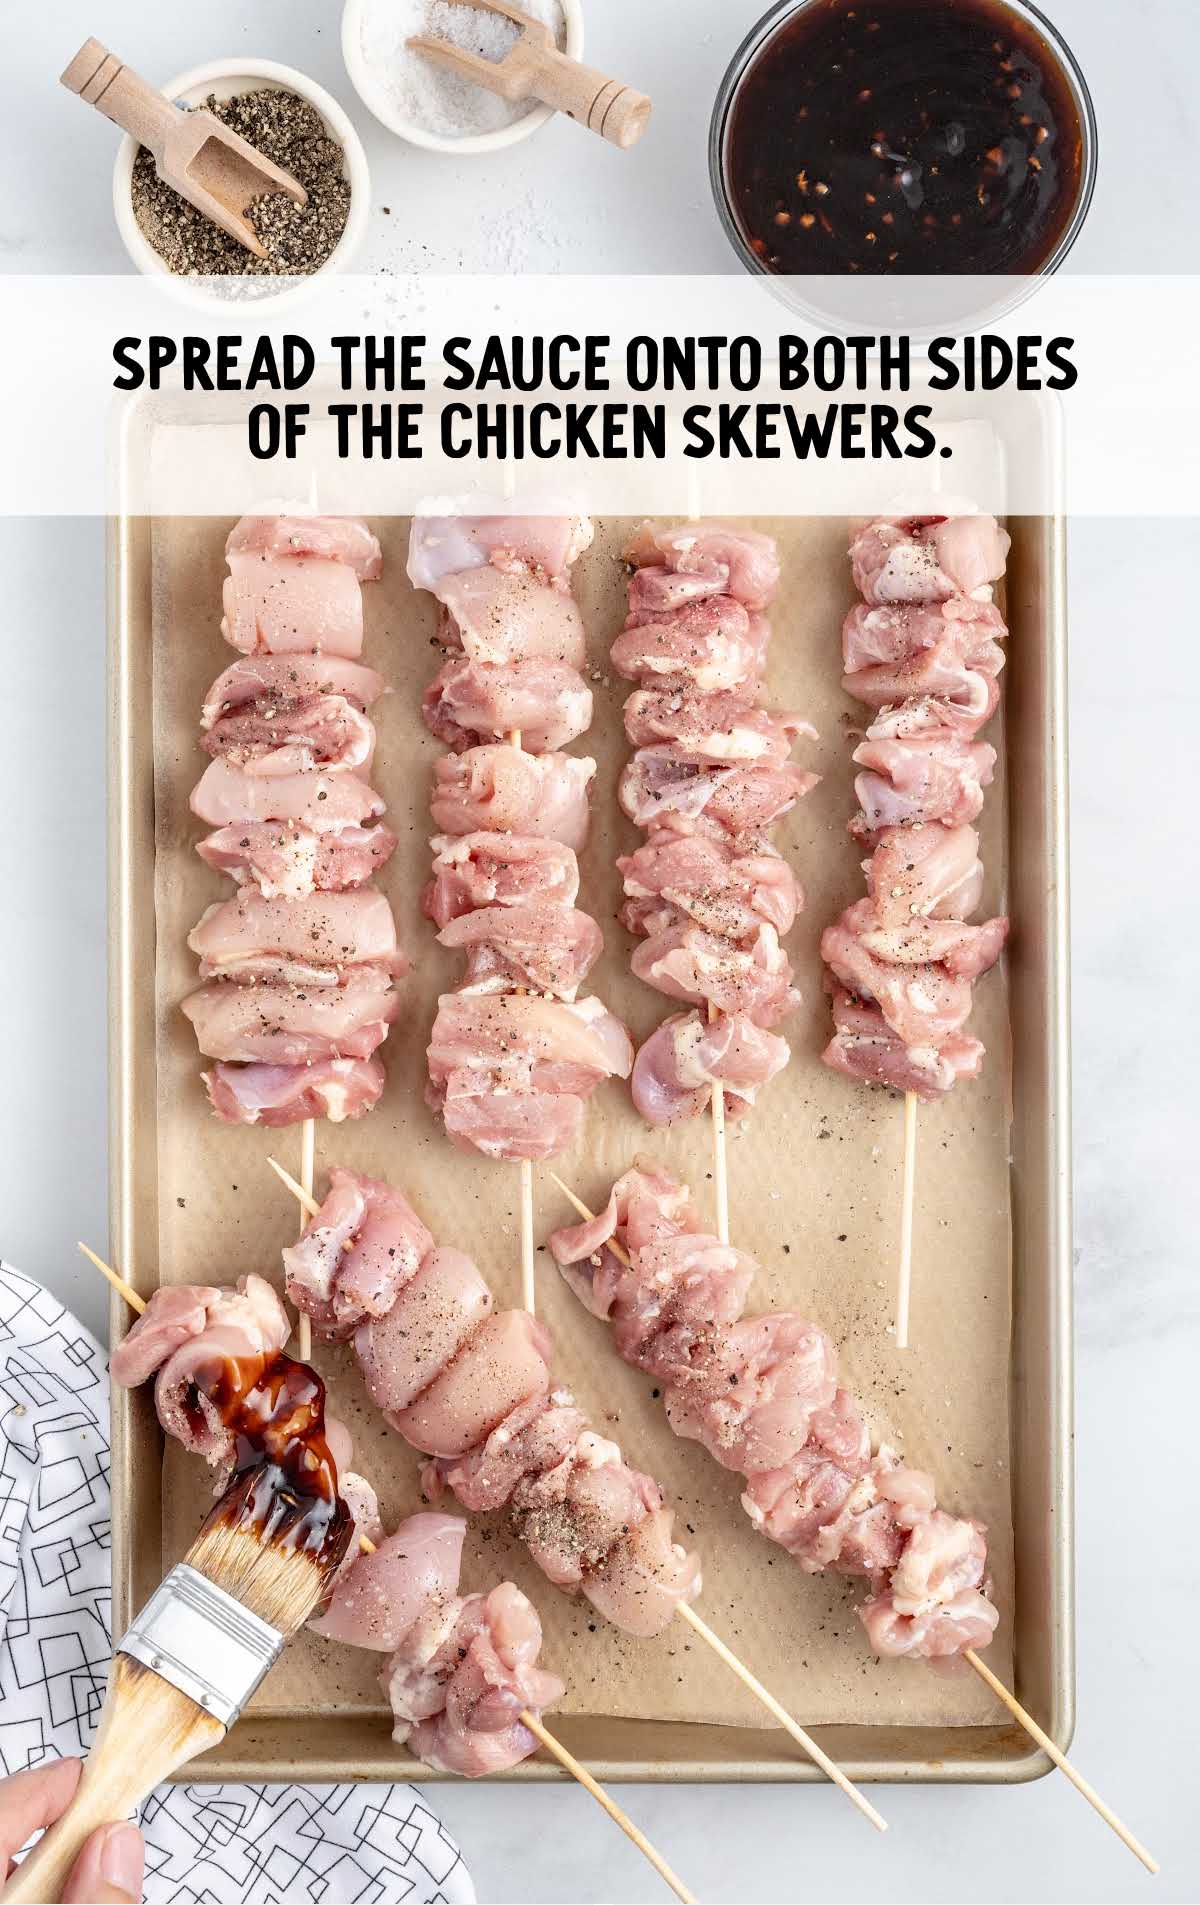 sauce spread on both sides of the chicken skewers